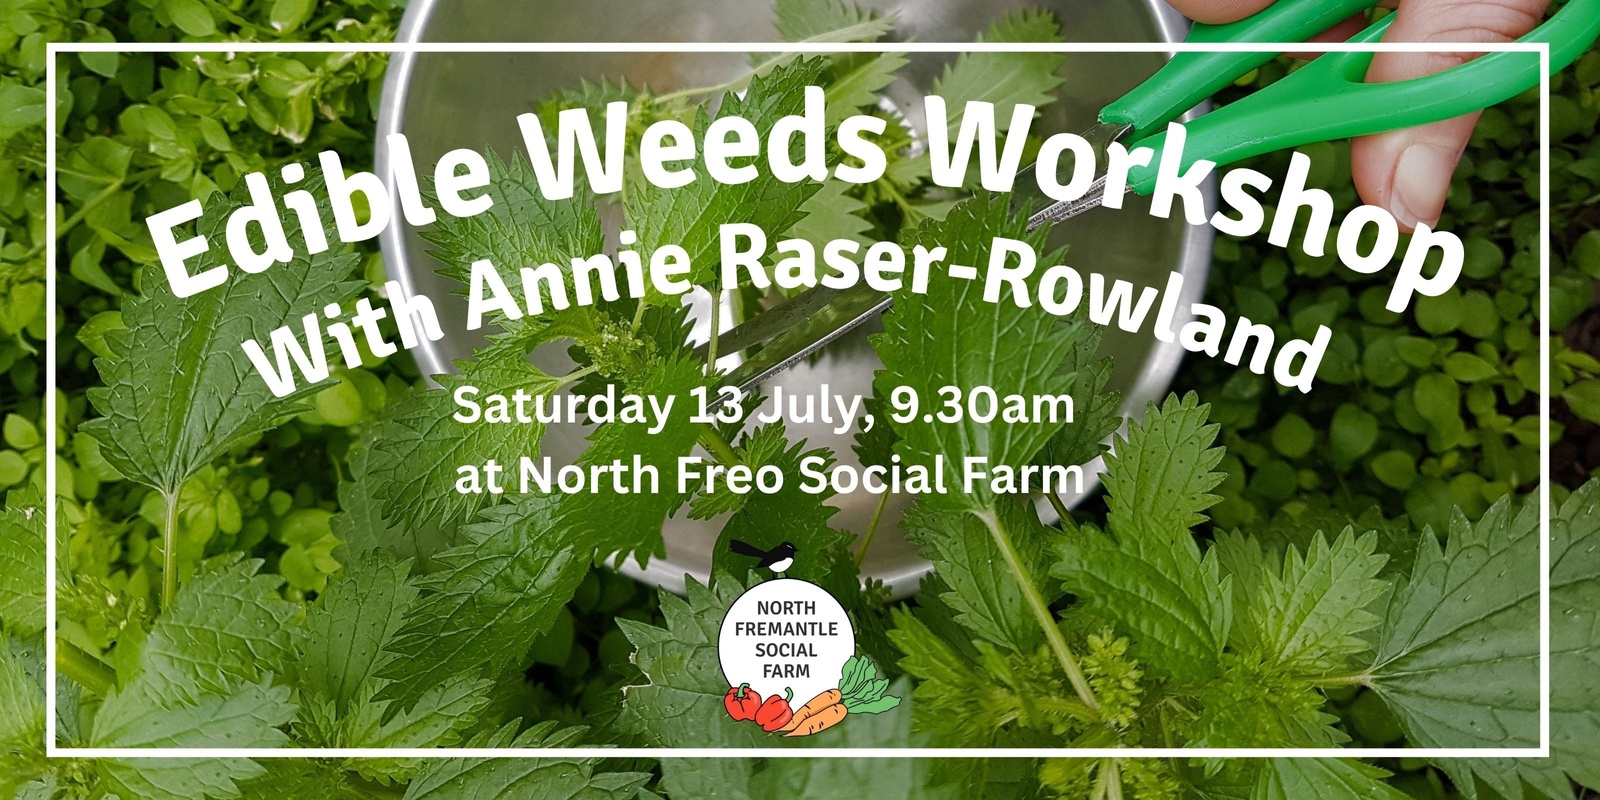 Banner image for Edible Weeds Workshop with Annie Raser-Rowland